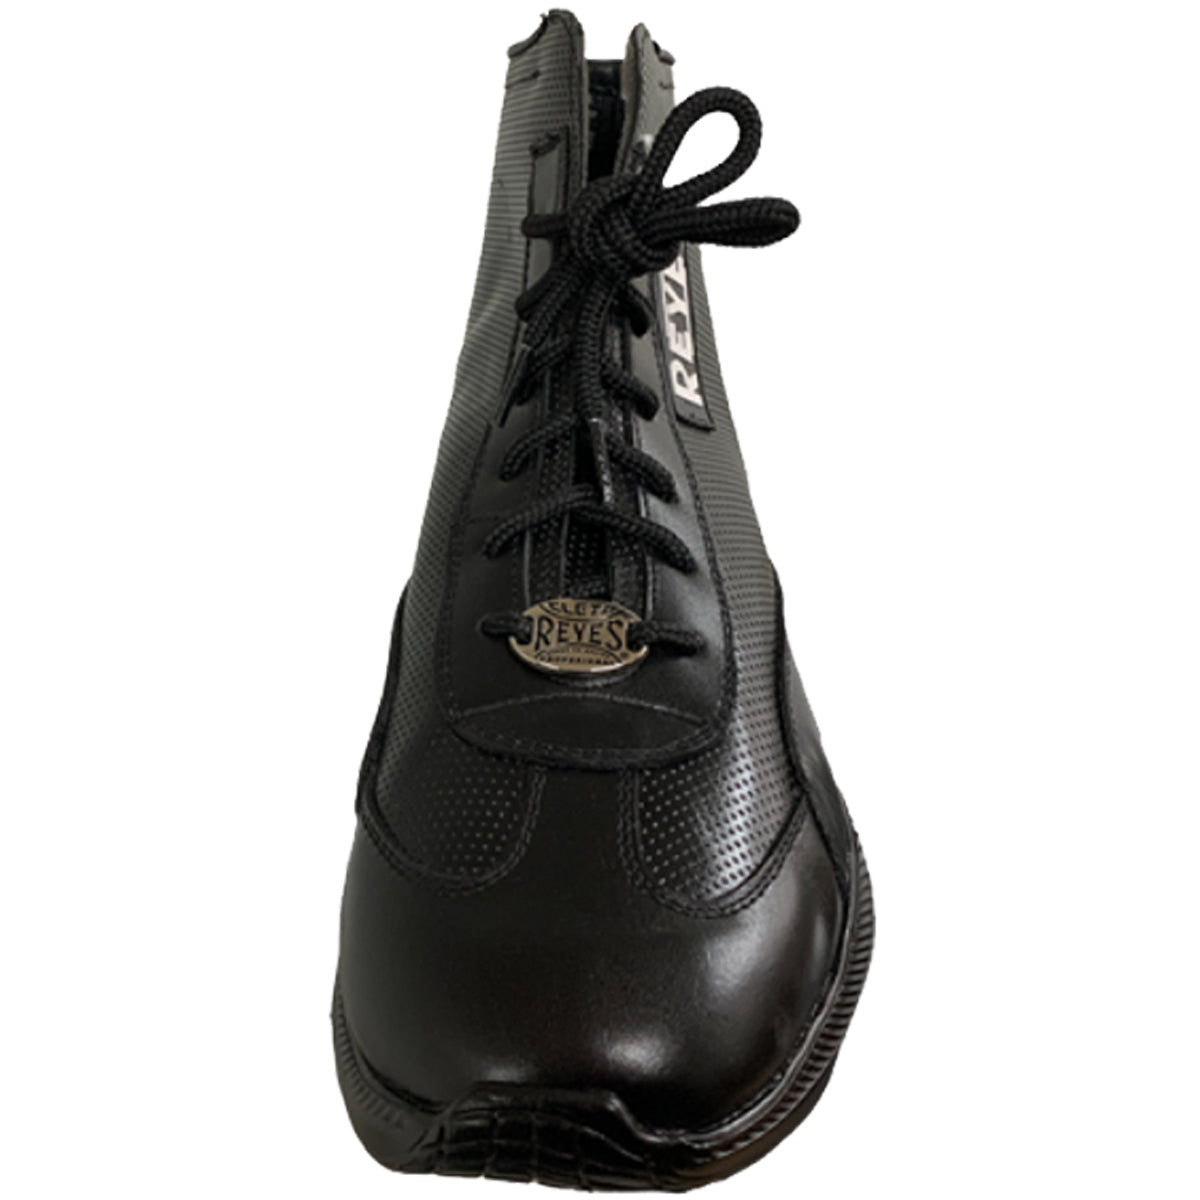 Cleto Reyes Mid Cut Leather Boxing Shoes - Black Cleto Reyes